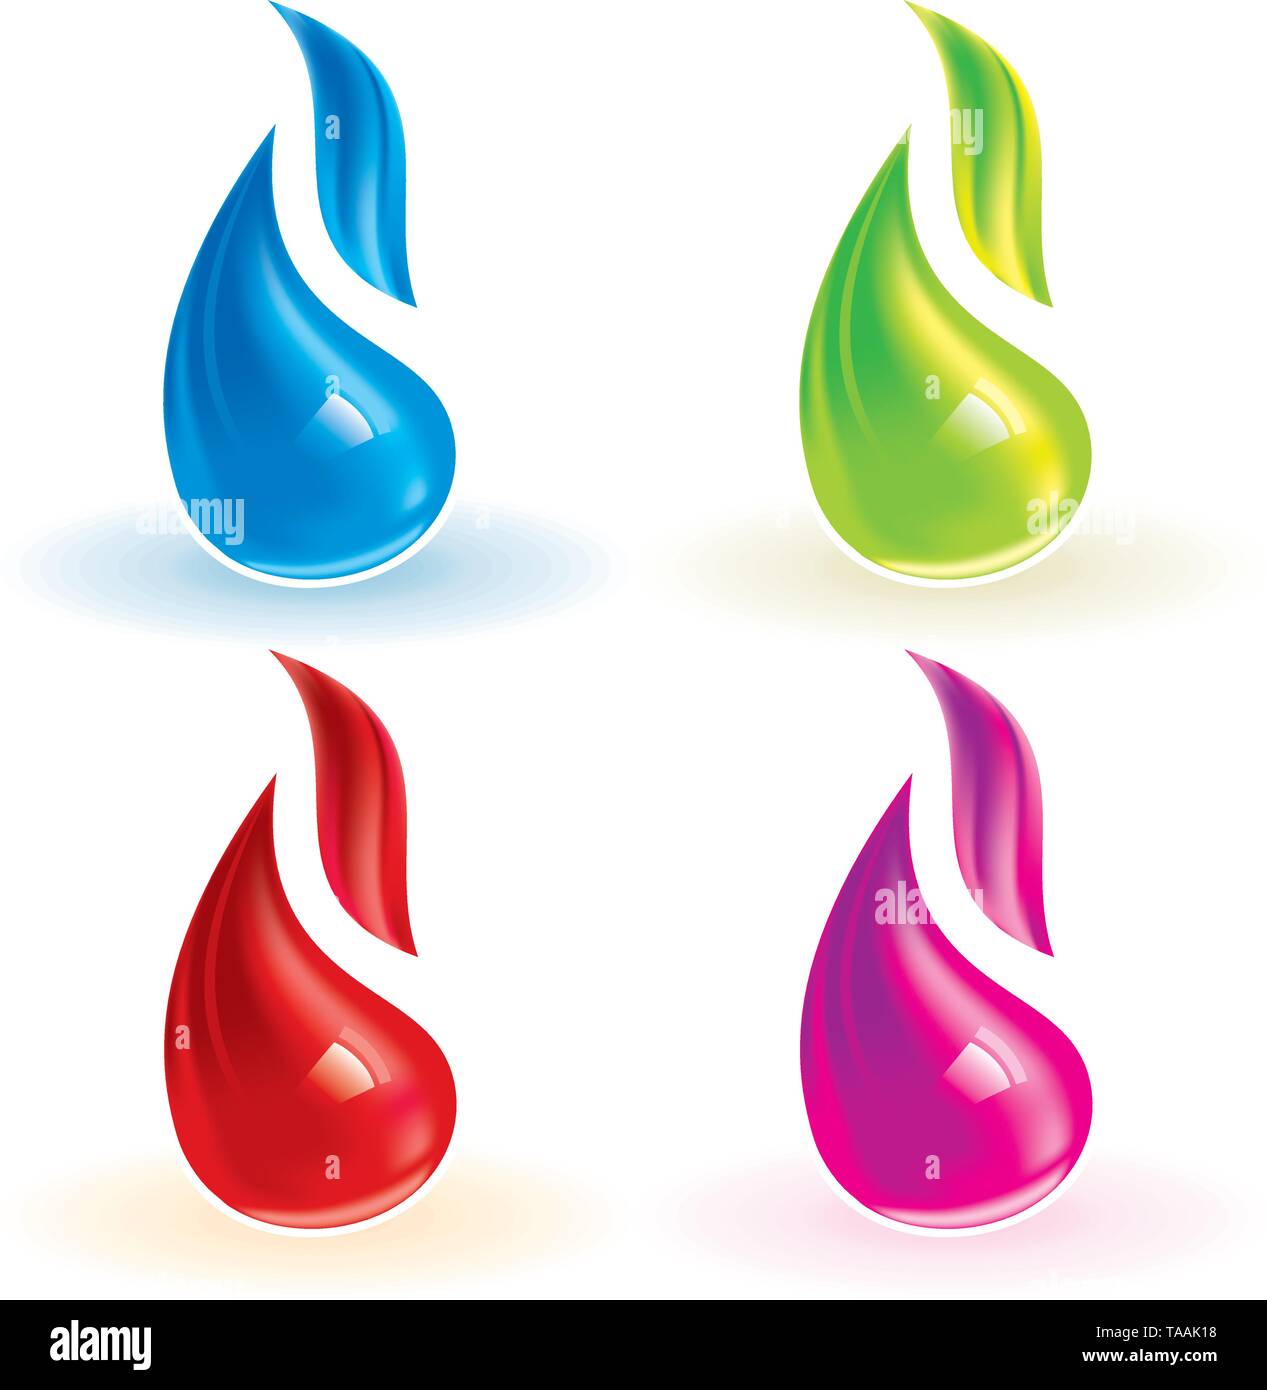 Vector illustration of four flame icons in different colors. Stock Vector